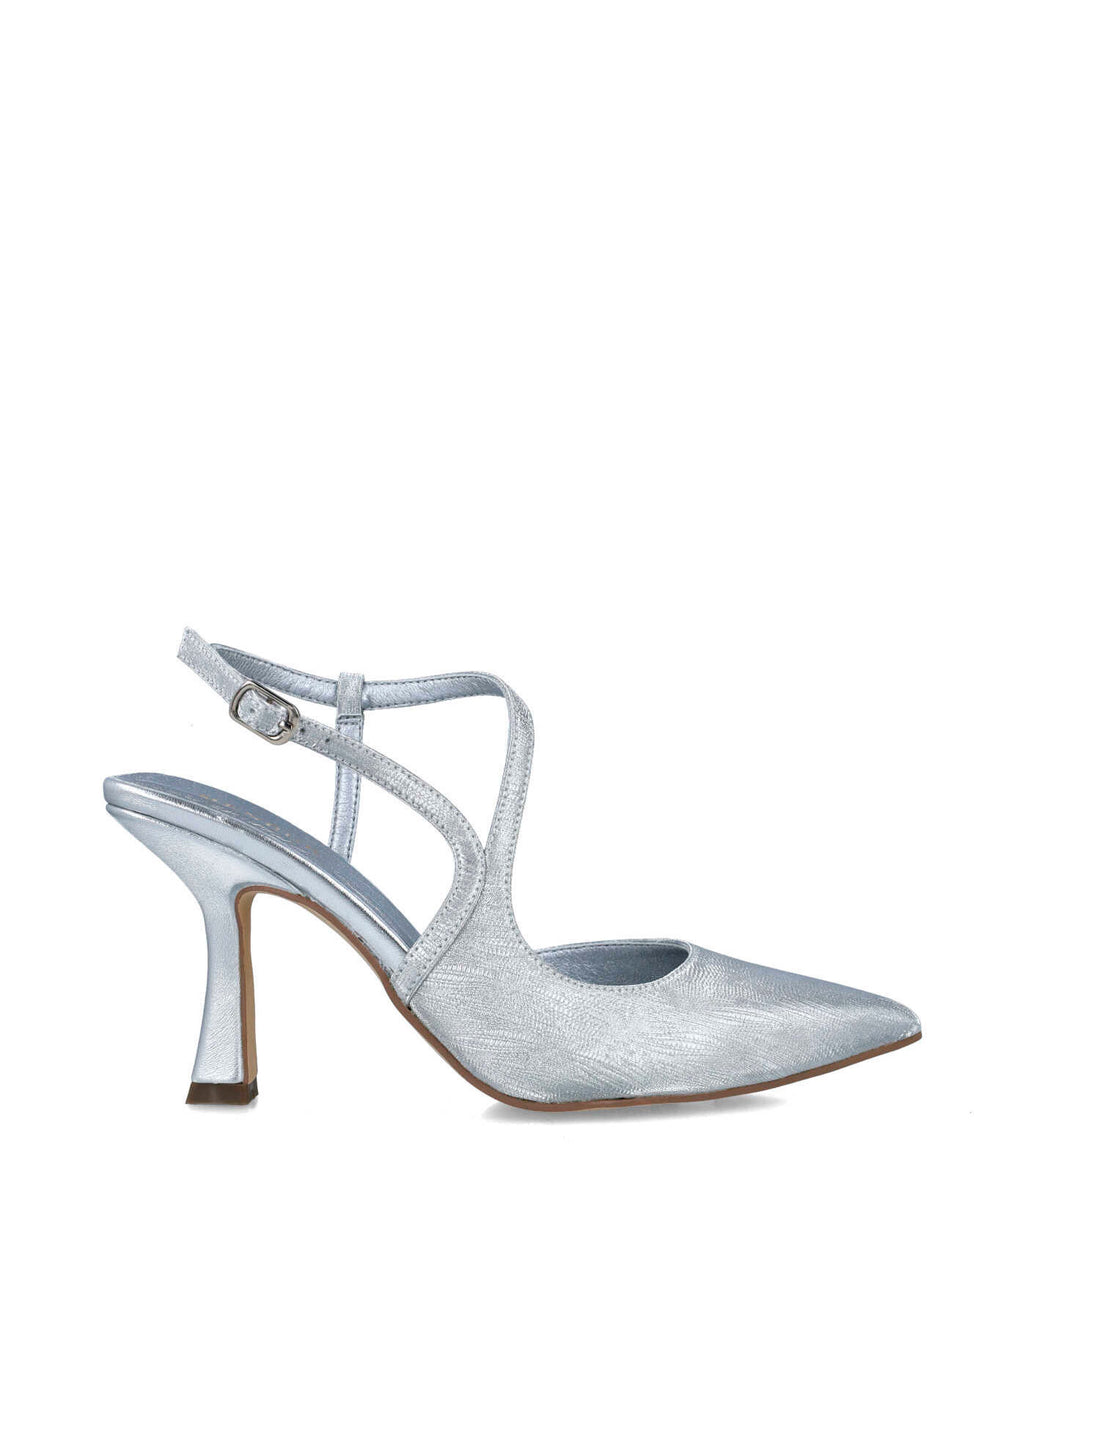 Silver Pumps With Ankle Strap_24767_09_01